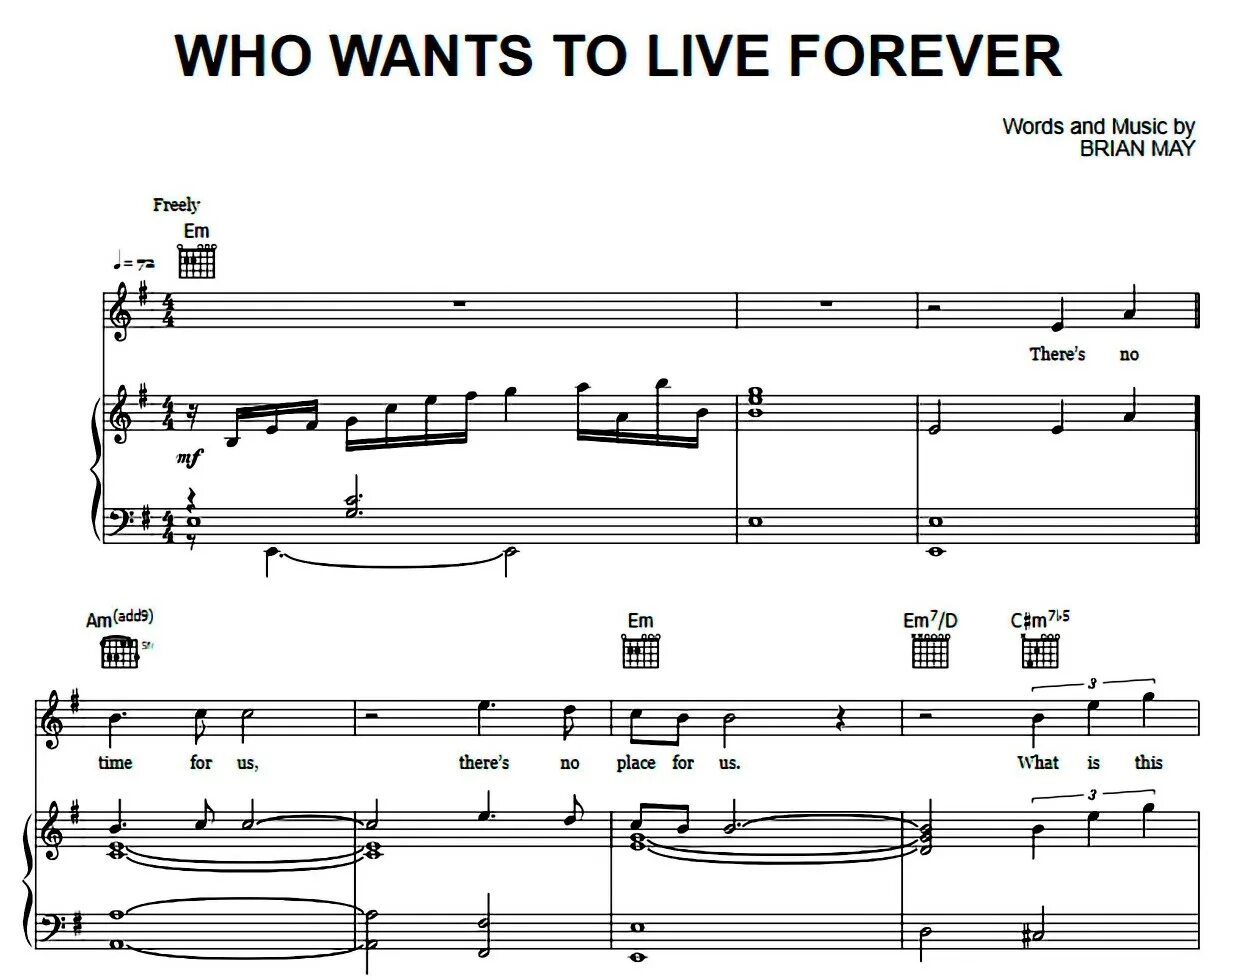 Wants live forever перевод. Who wants to Live Forever Queen Ноты. Who wants to Live Forever Ноты для фортепиано. Ноты who wants to Live Forever для фортепиано для начинающих. Who wants to Live Forever Queen Ноты для фортепиано.